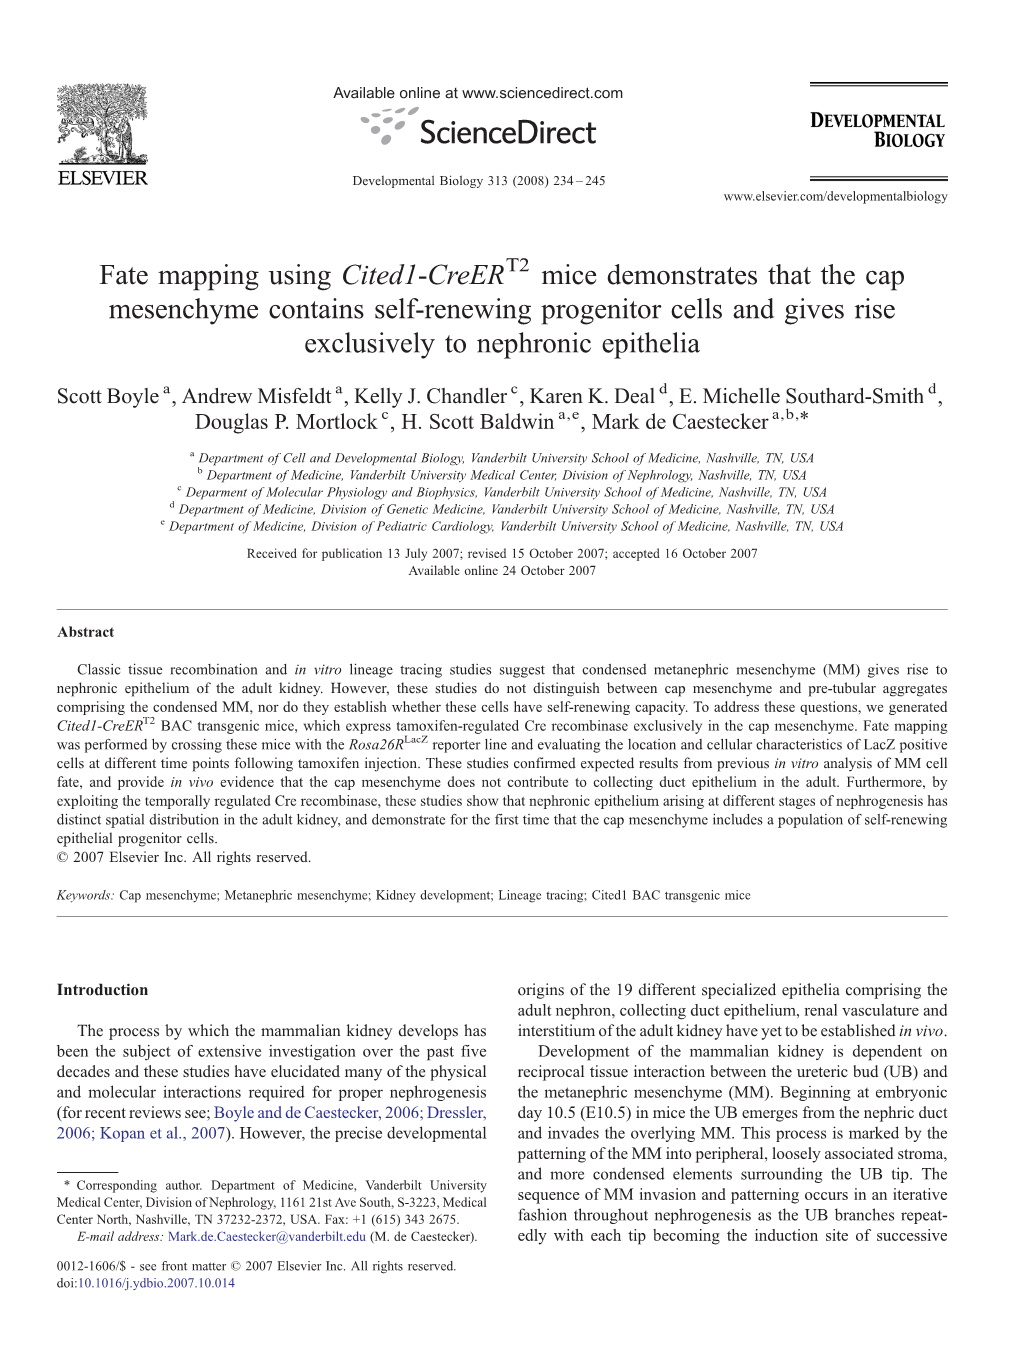 Fate Mapping Using Cited1-Creer Mice Demonstrates That the Cap